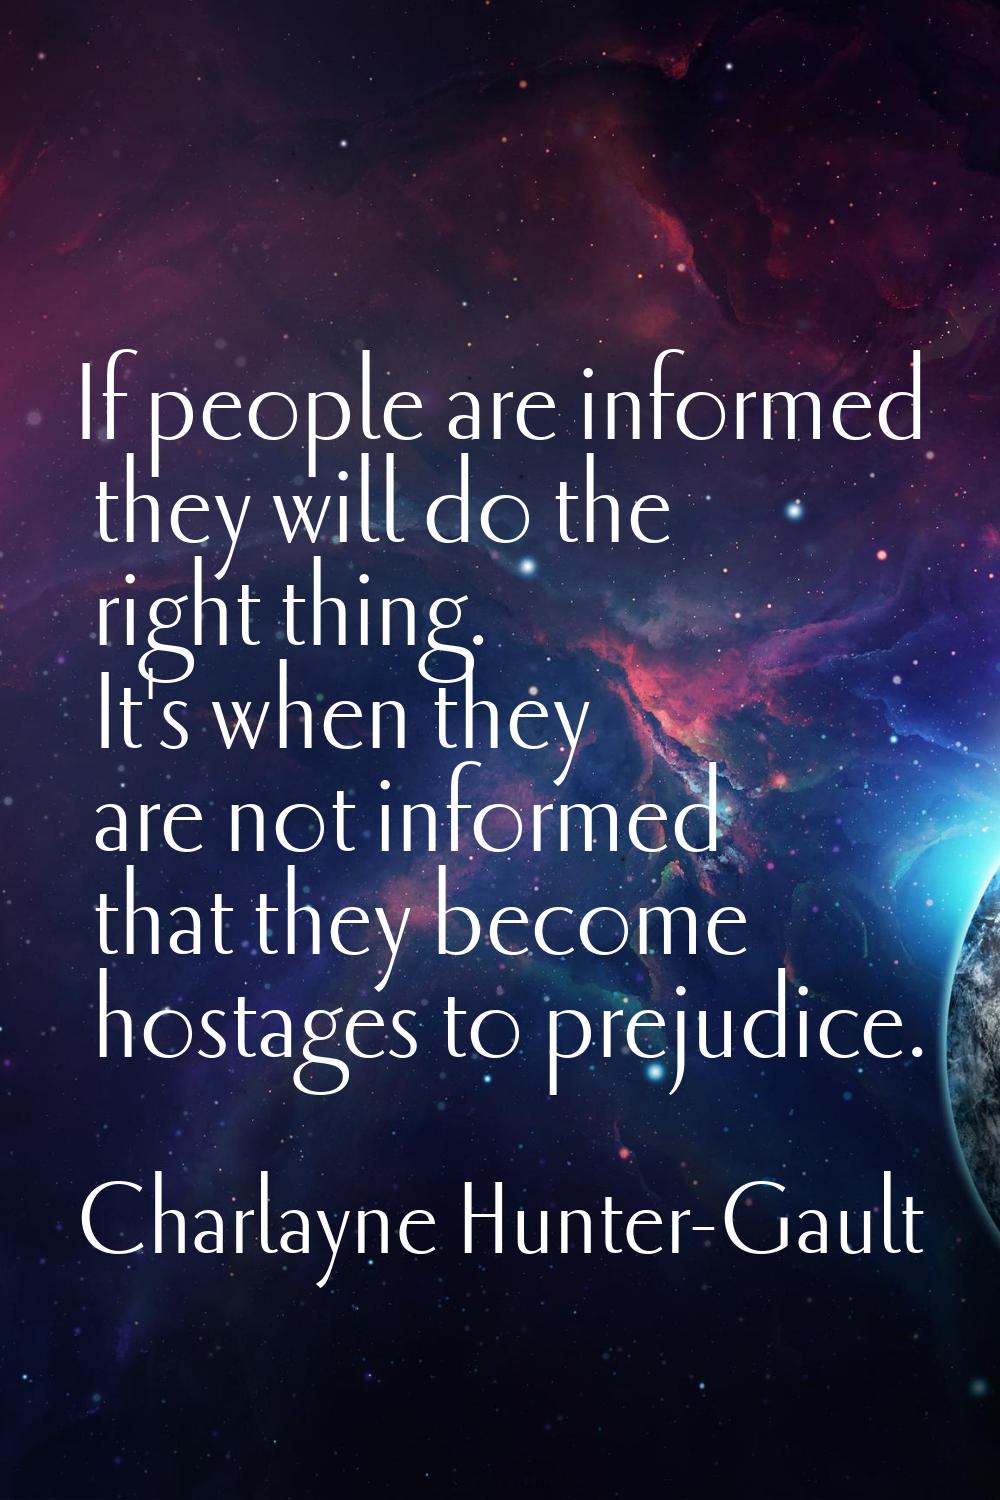 If people are informed they will do the right thing. It's when they are not informed that they beco